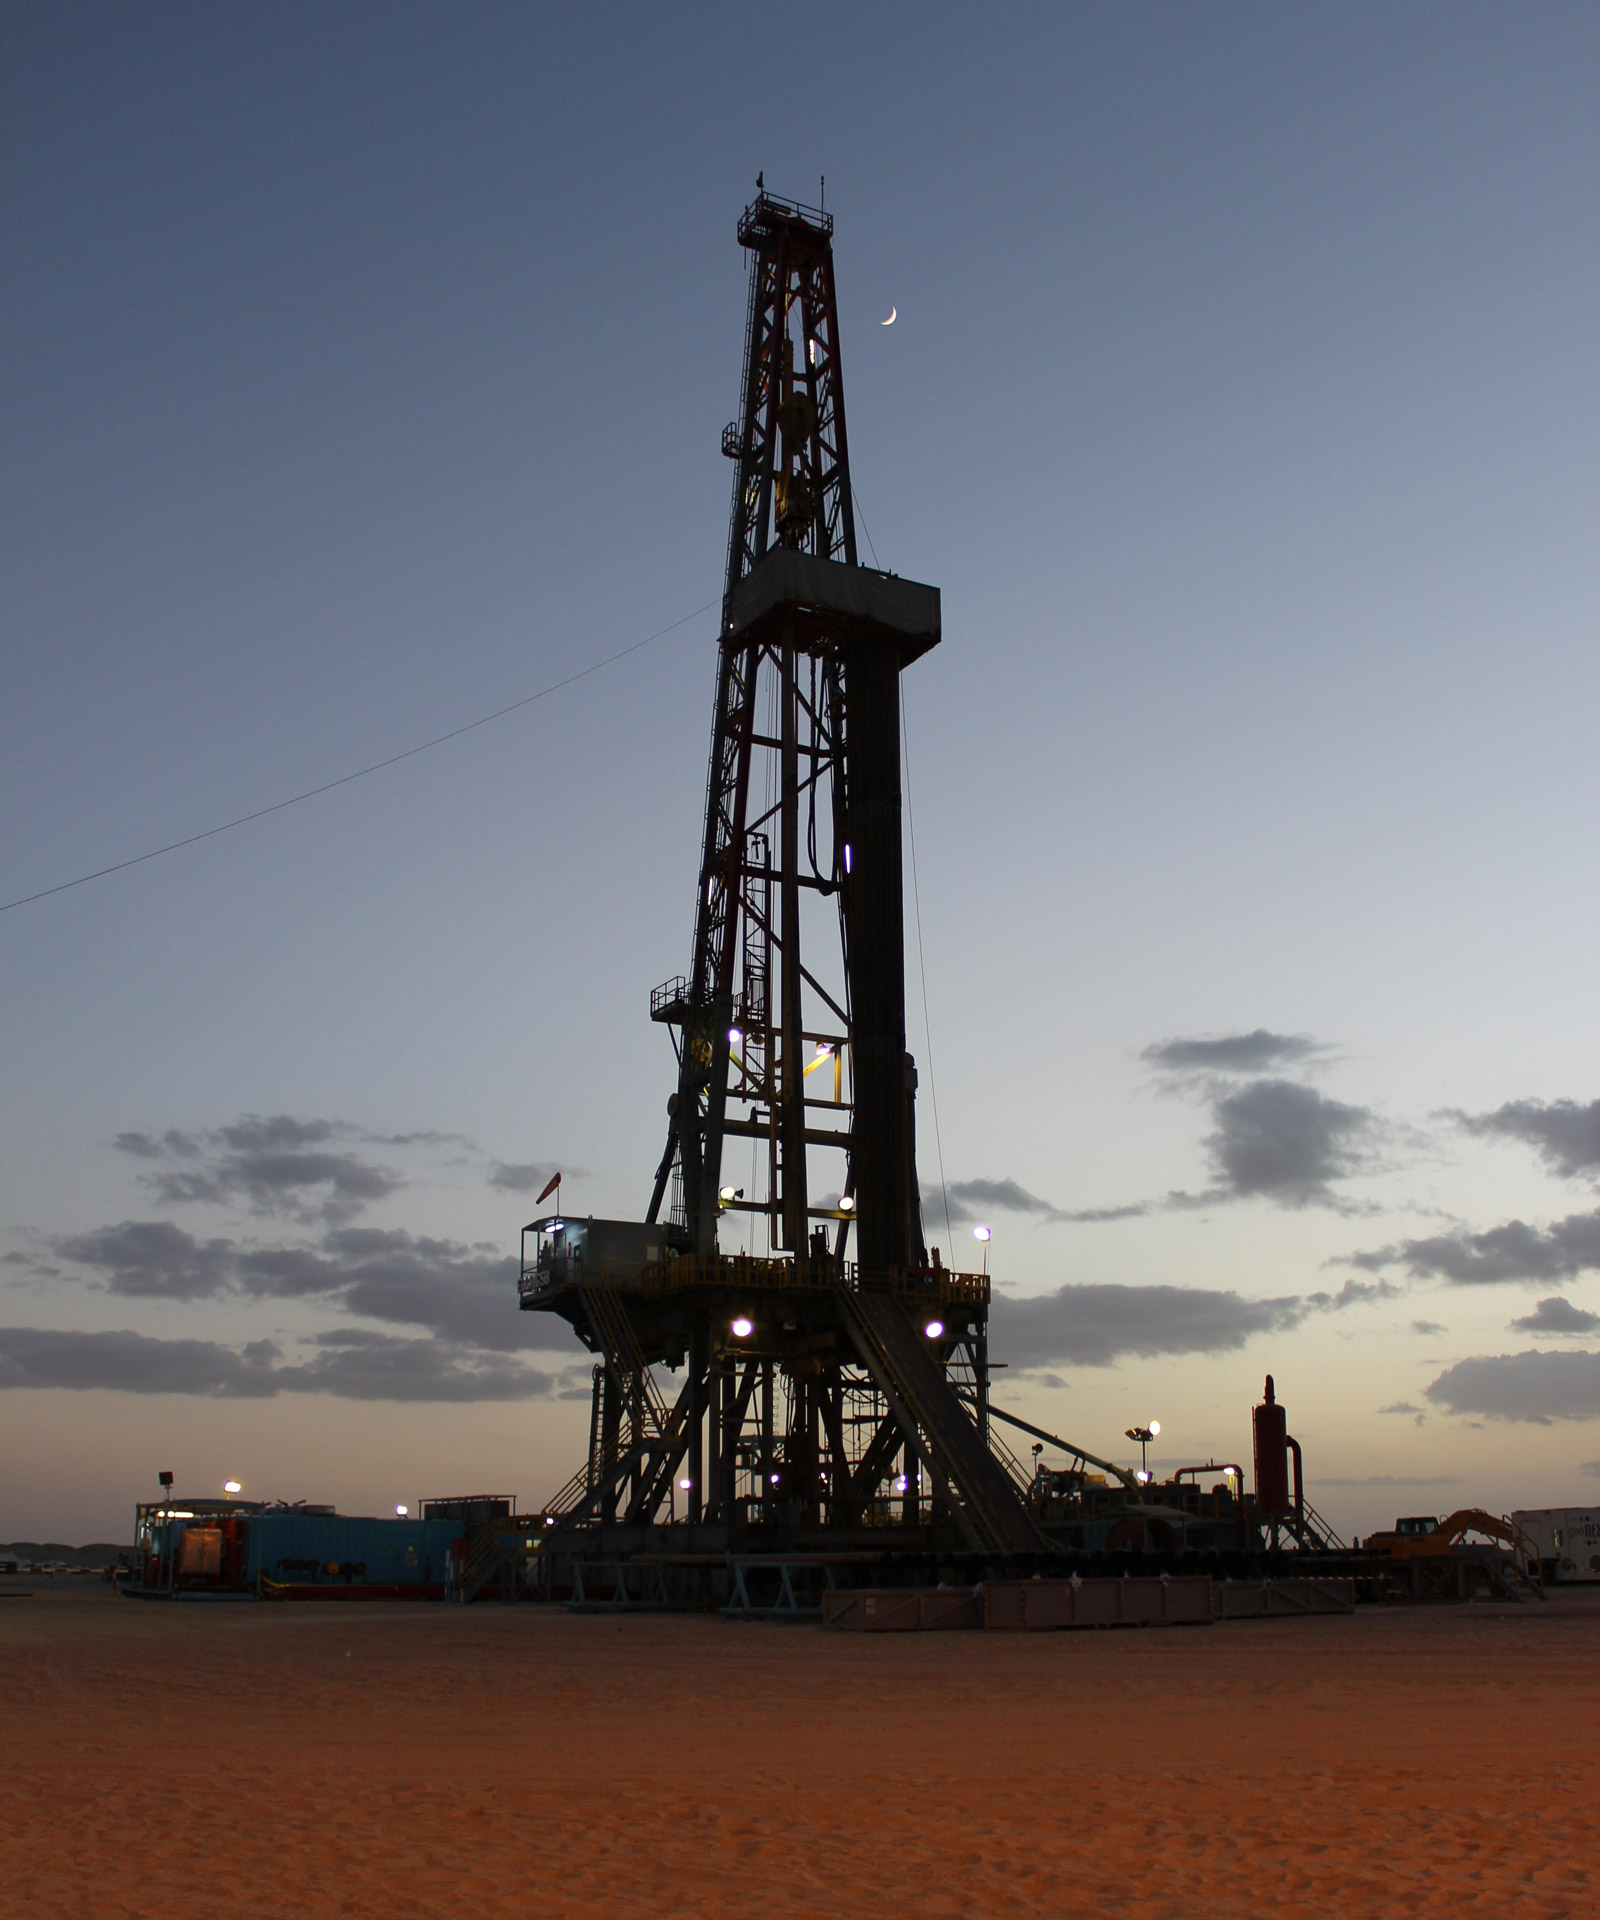 A drill rig in eastern Libya, south of Ajdabija, photographed in 2013.